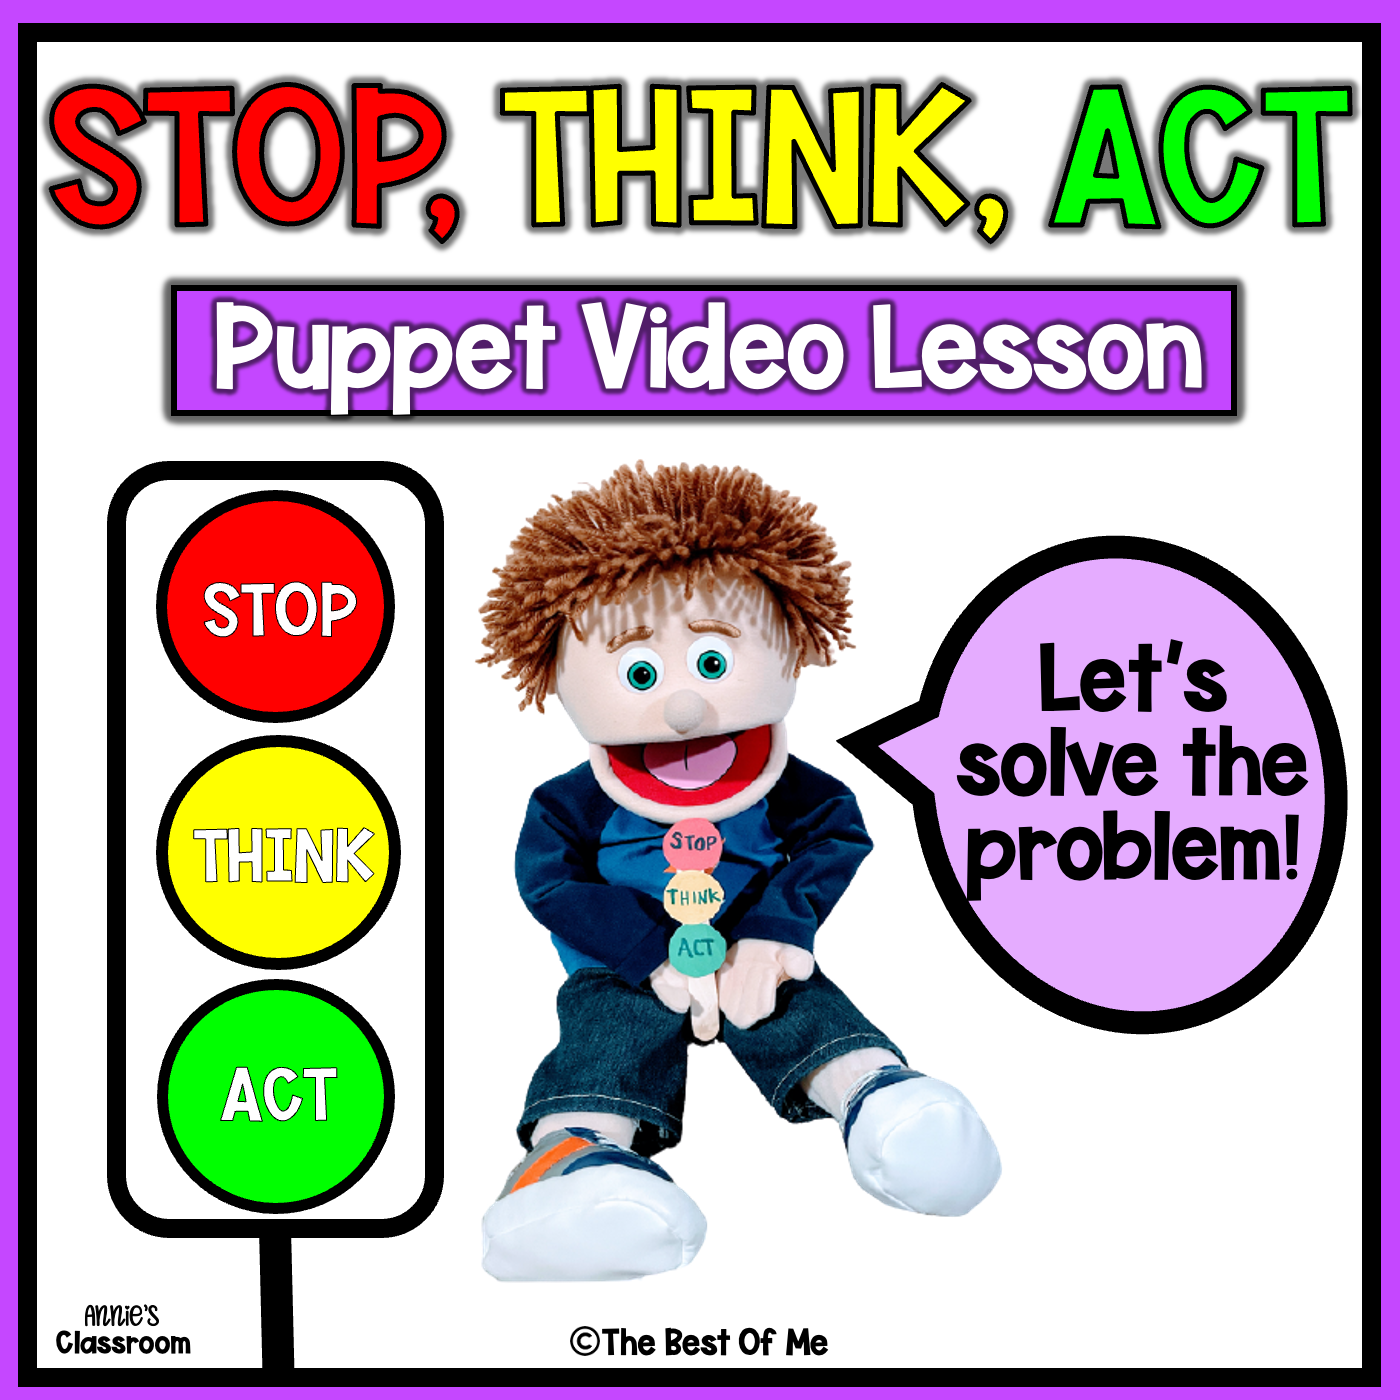 stop-think-act-problem-solving-social-skills-social-emotional-learning-lesson-annie-s